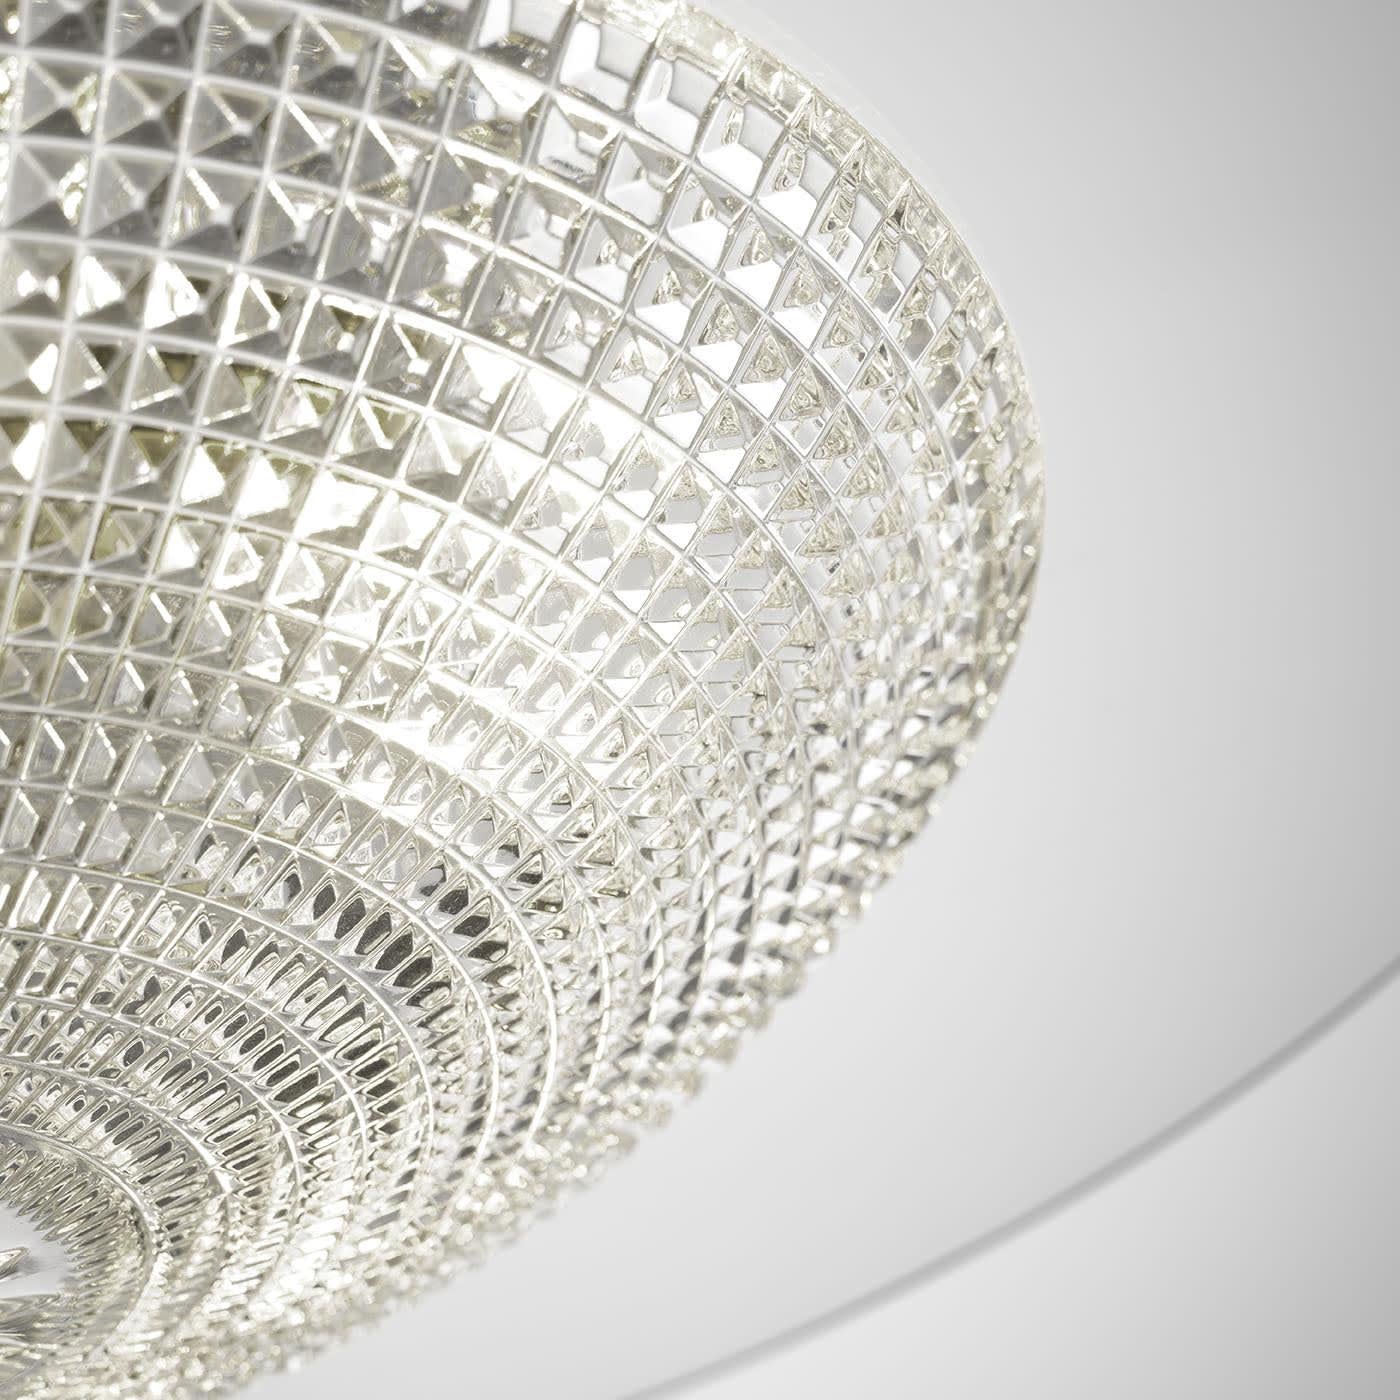 Exuding sophisticated and timeless charm, this chandelier is the masterful and daring synthesis between traditional and contemporary influences. The combination of prized crystal and glass - enhanced by the smooth circular panel topping the textured